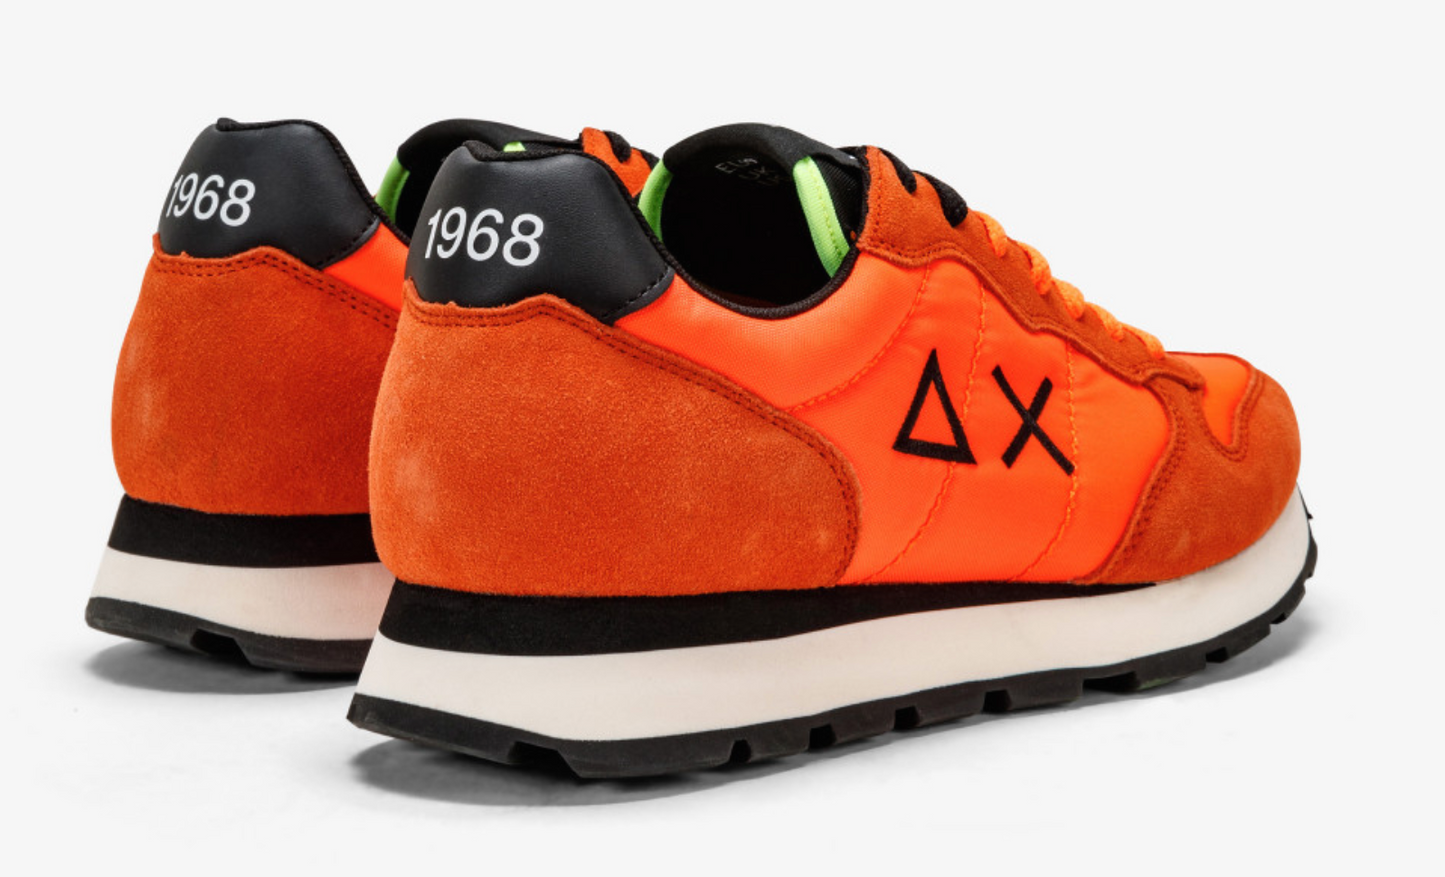 Fluo Orange Sneaker with Leather Accents